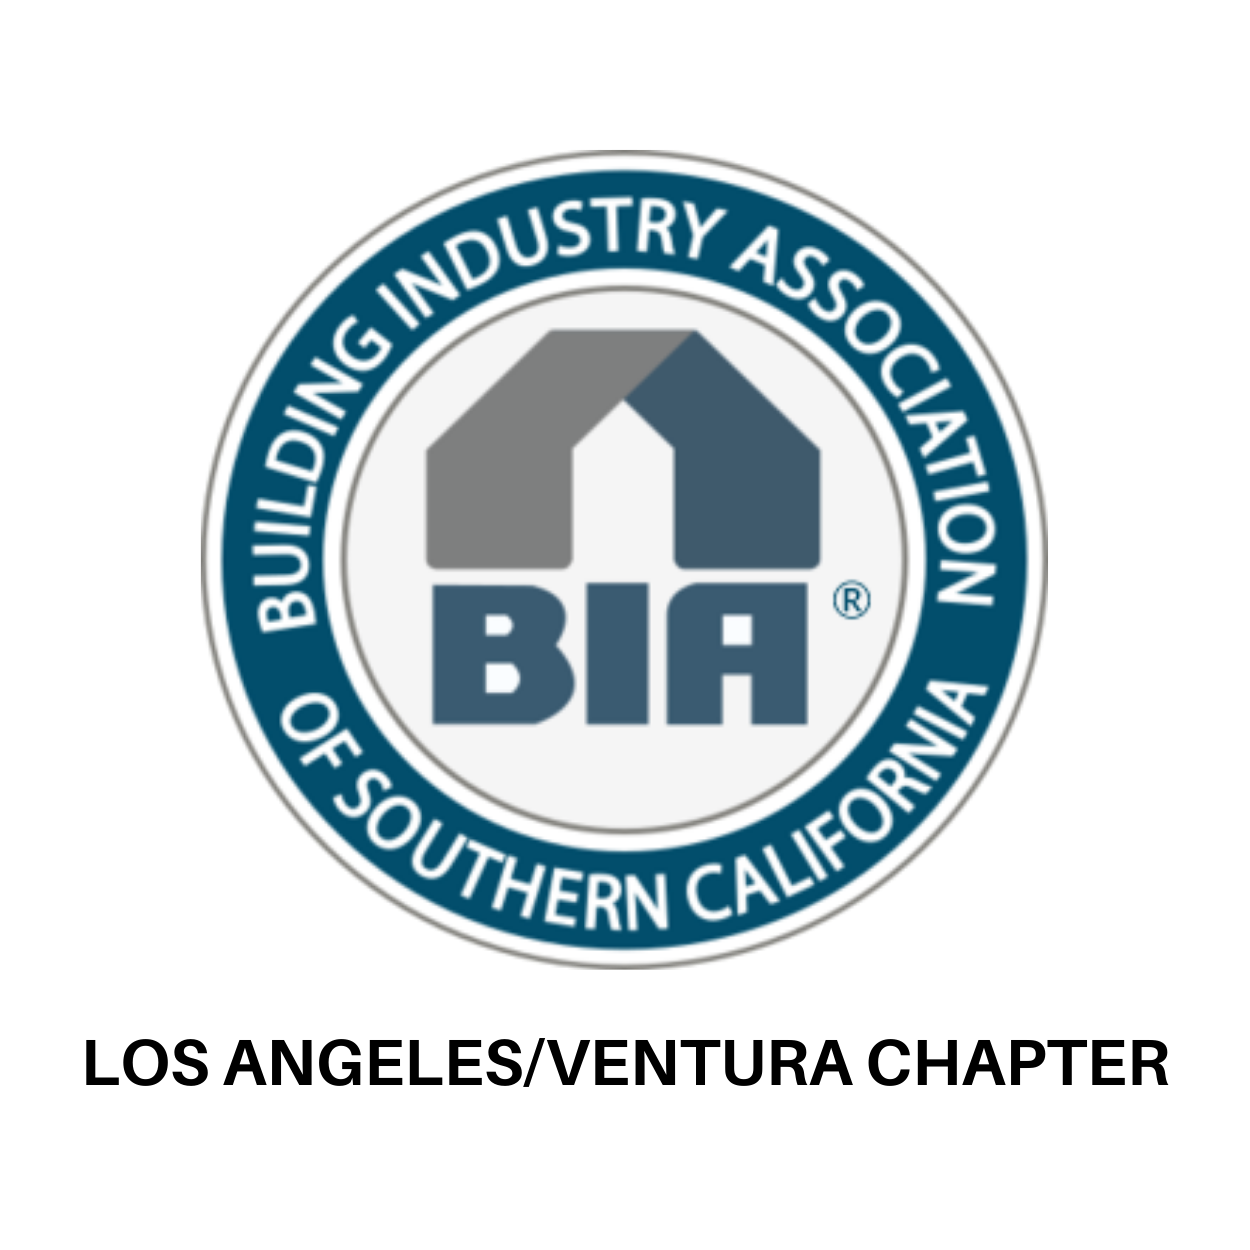 Business Industry Association of So Cal